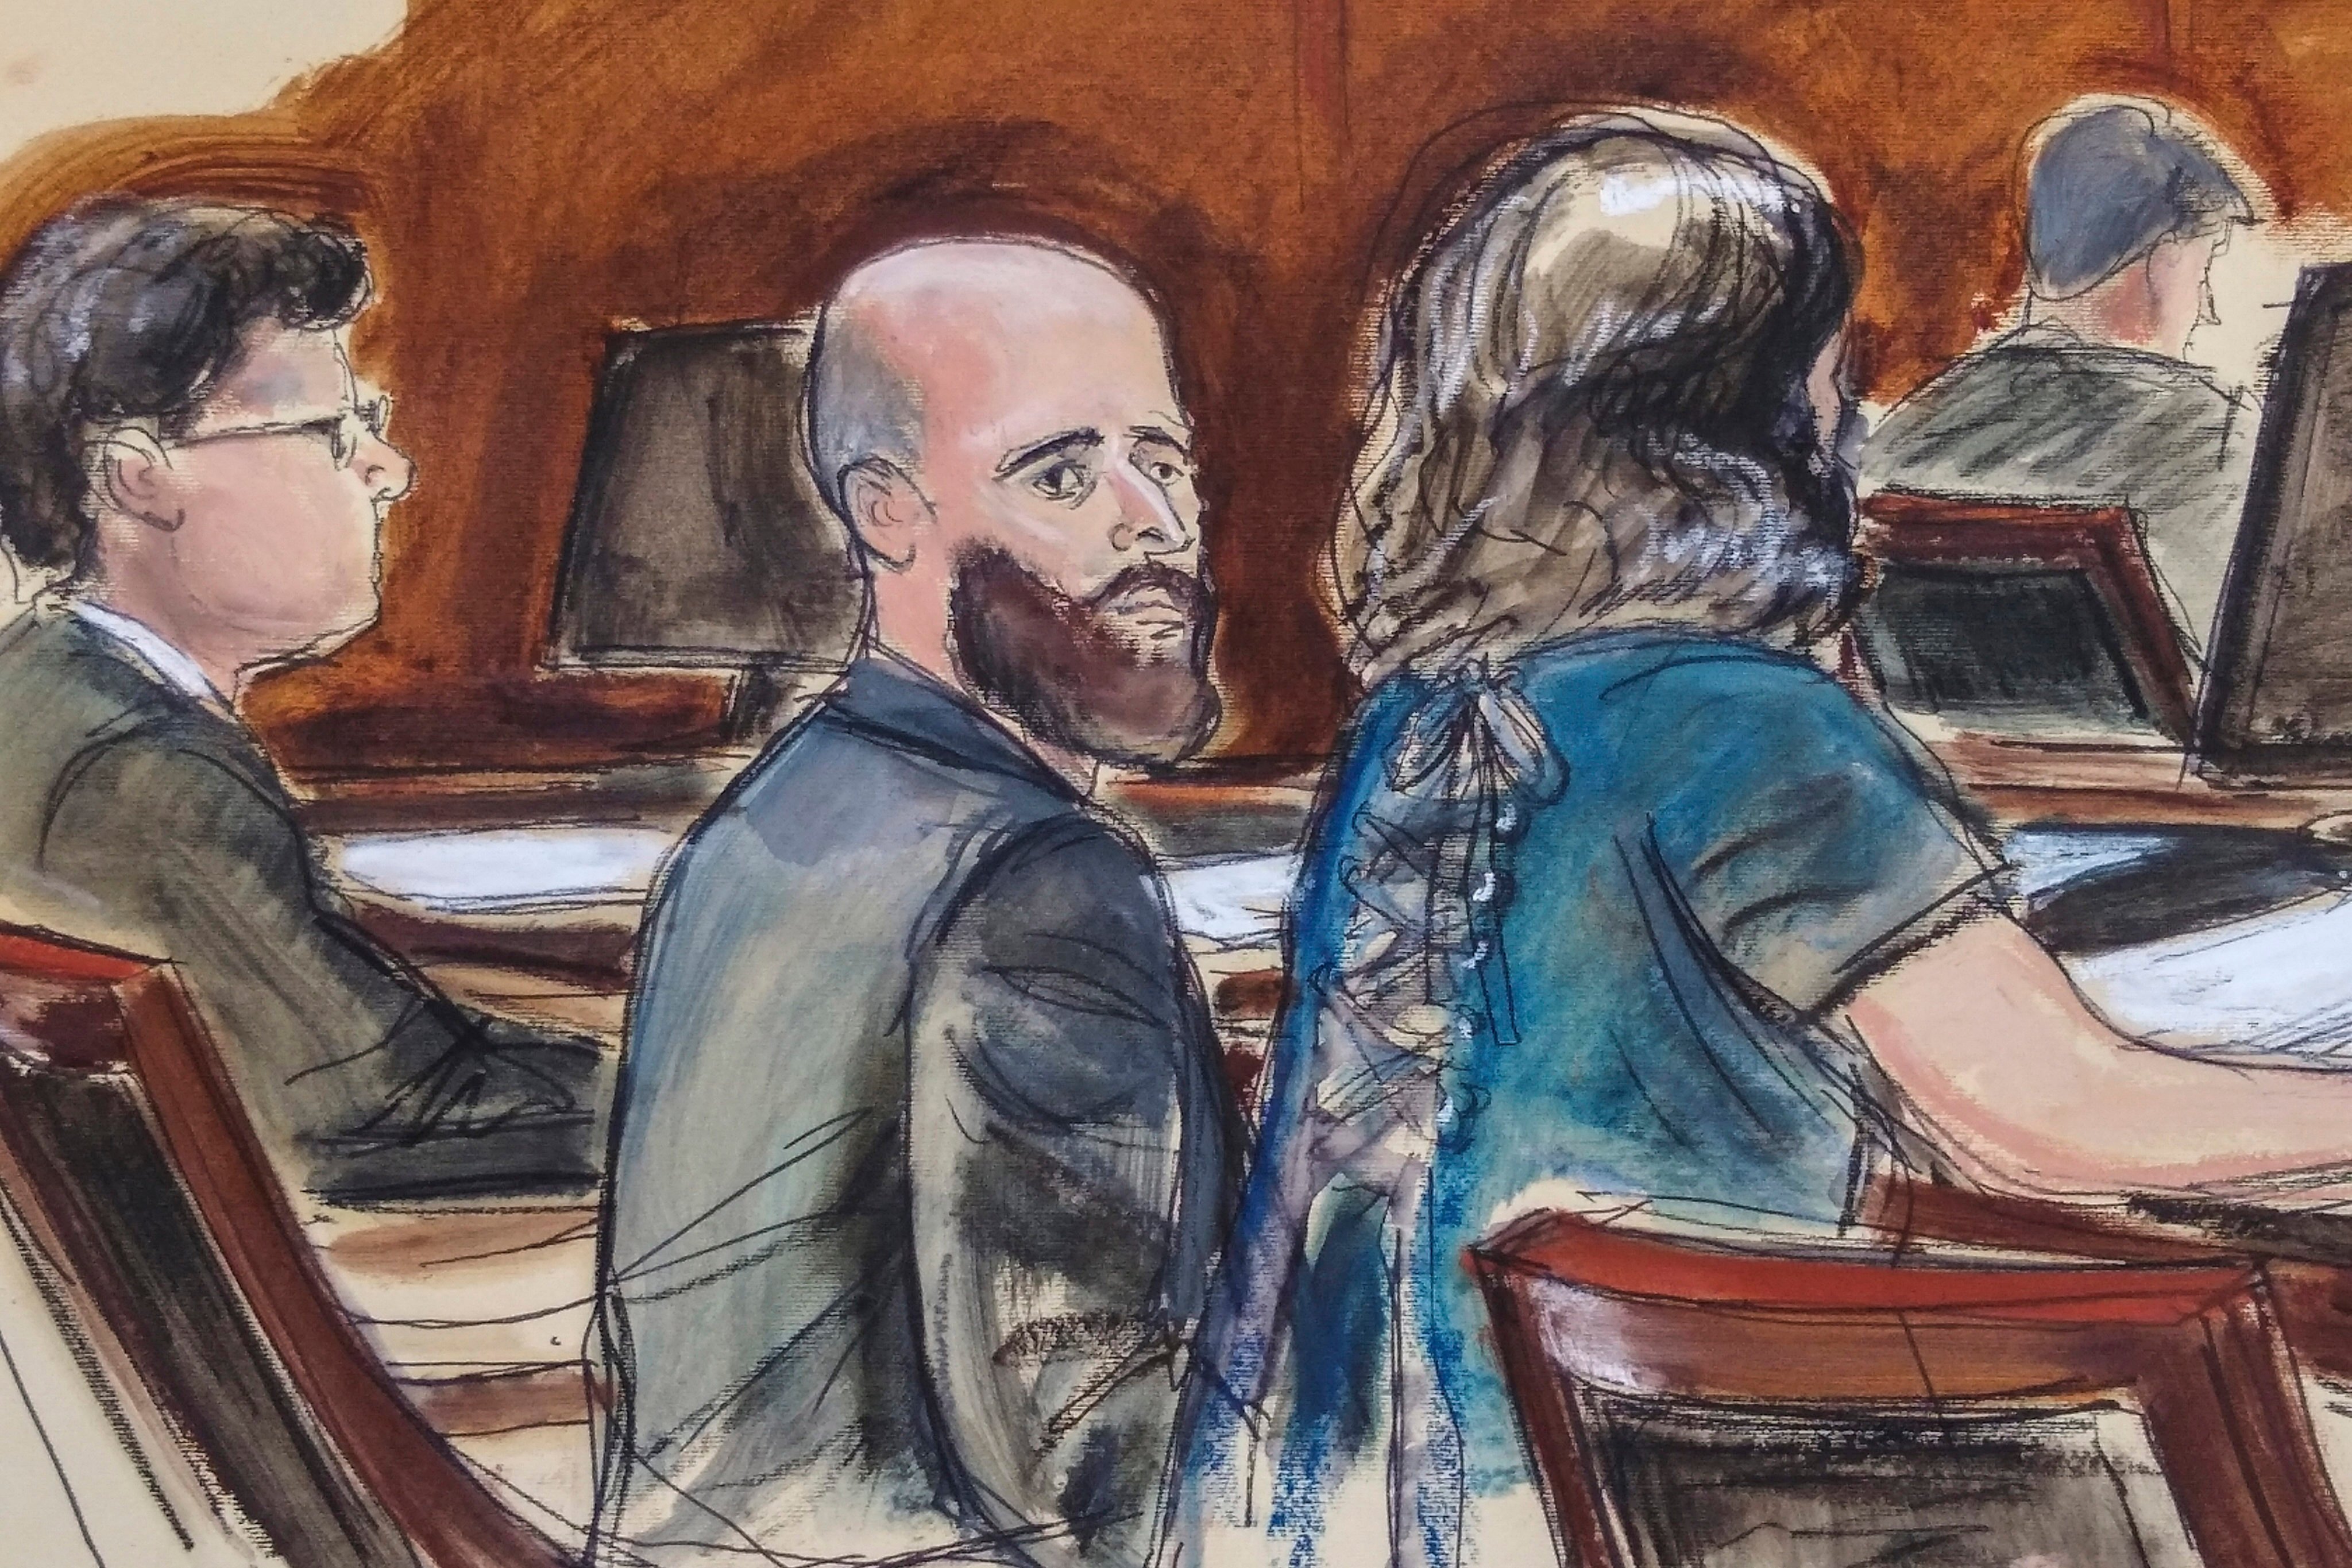 Joshua Schulte (centre) is flanked by his lawyers during jury deliberations in New York in March 2020. Courtroom sketch: Elizabeth Williams via AP